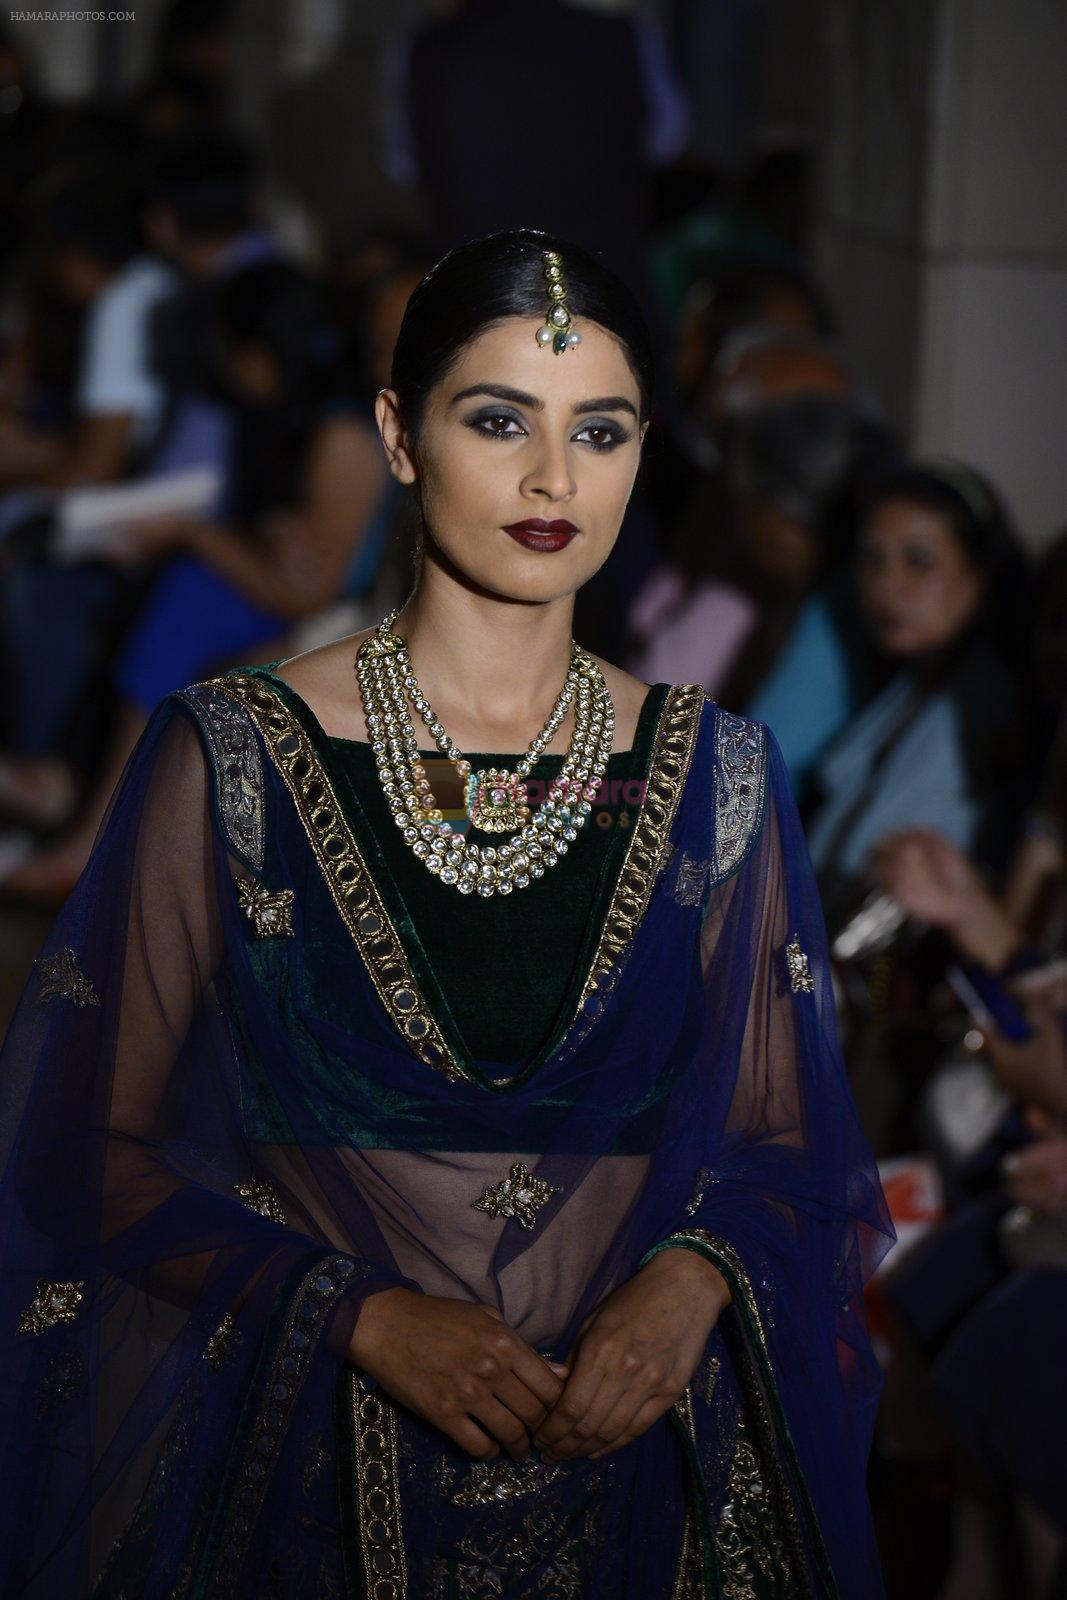 Model walks for Manav Gangwani latest collection Begum-e-Jannat at the FDCI India Couture Week 2016 on 24 July 2016